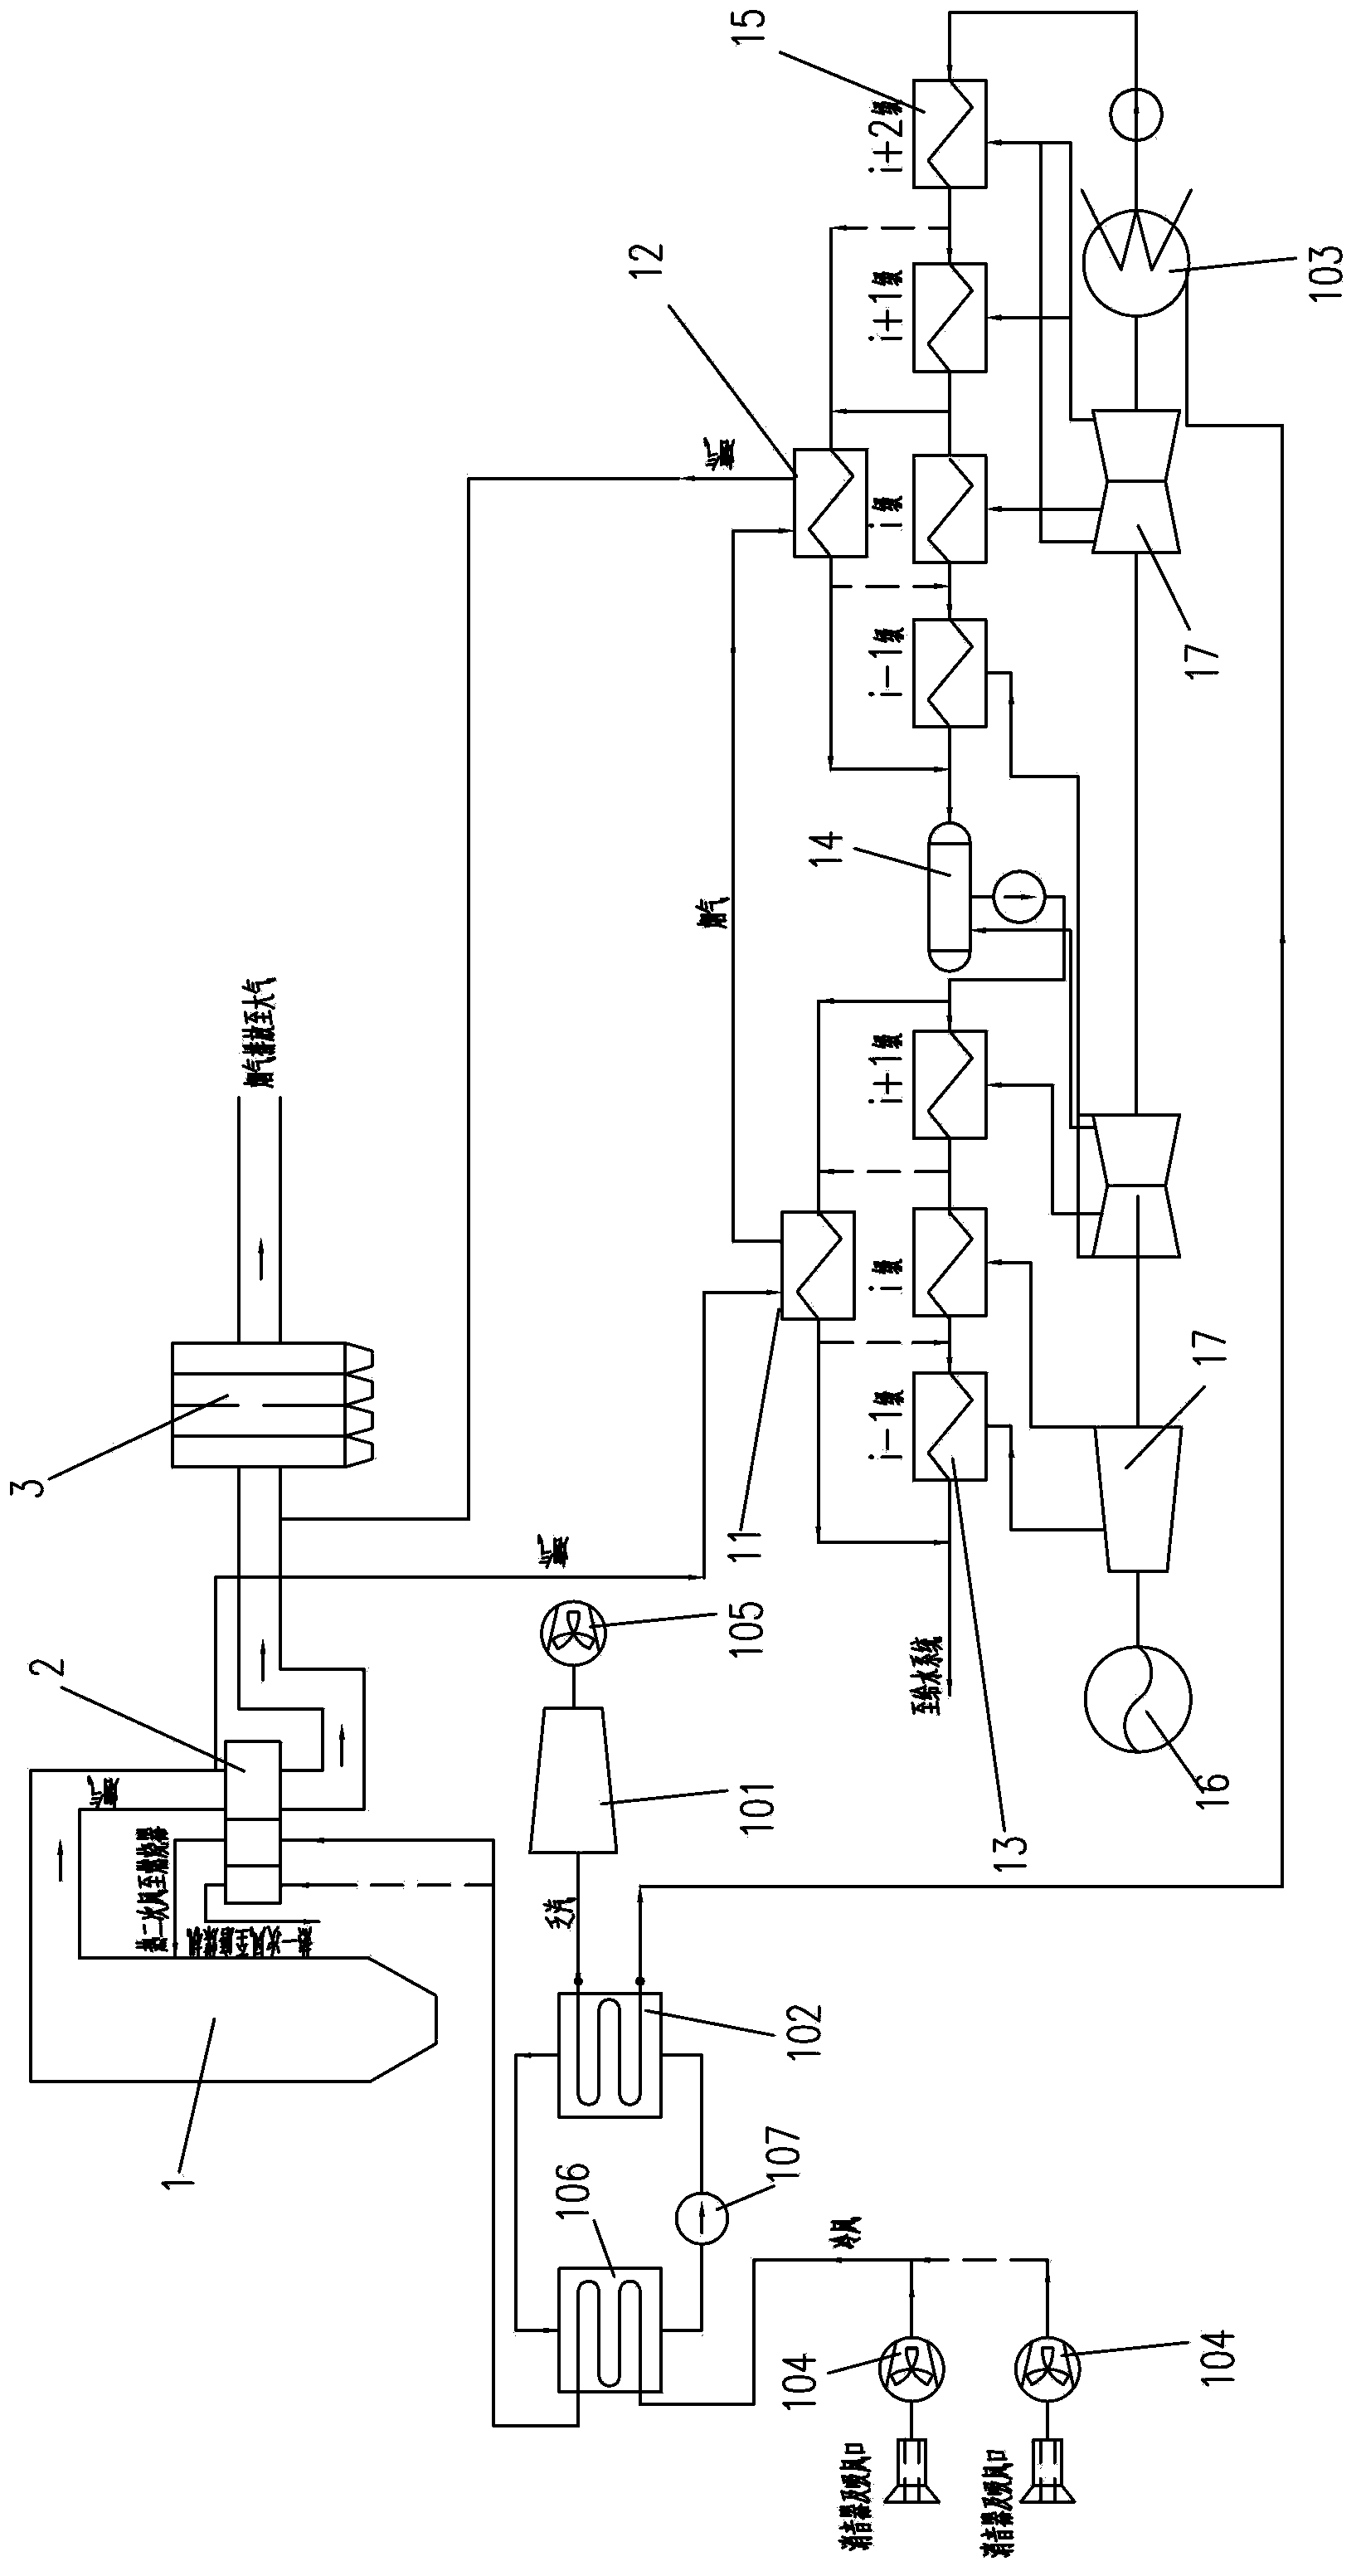 Steam exhaust energy utilizing system of driving steam turbine of thermal power plant and thermal power unit